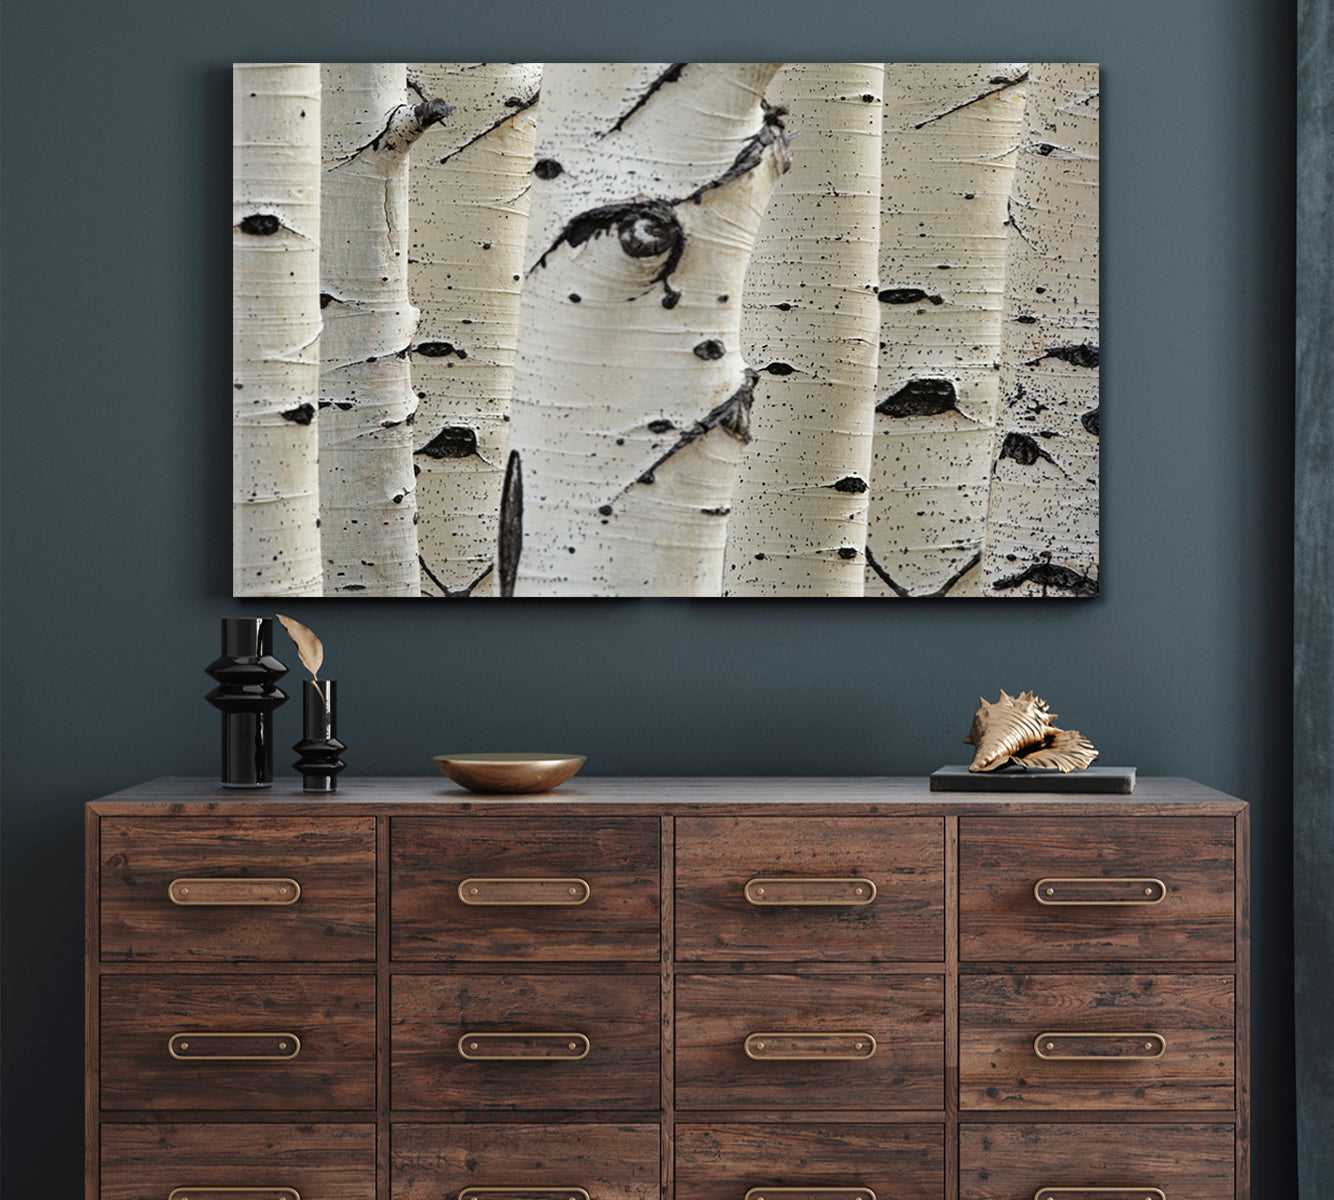 Birch Trees Row Close-up Trunks Nature Wall Canvas Print Artesty 1 panel 24" x 16" 